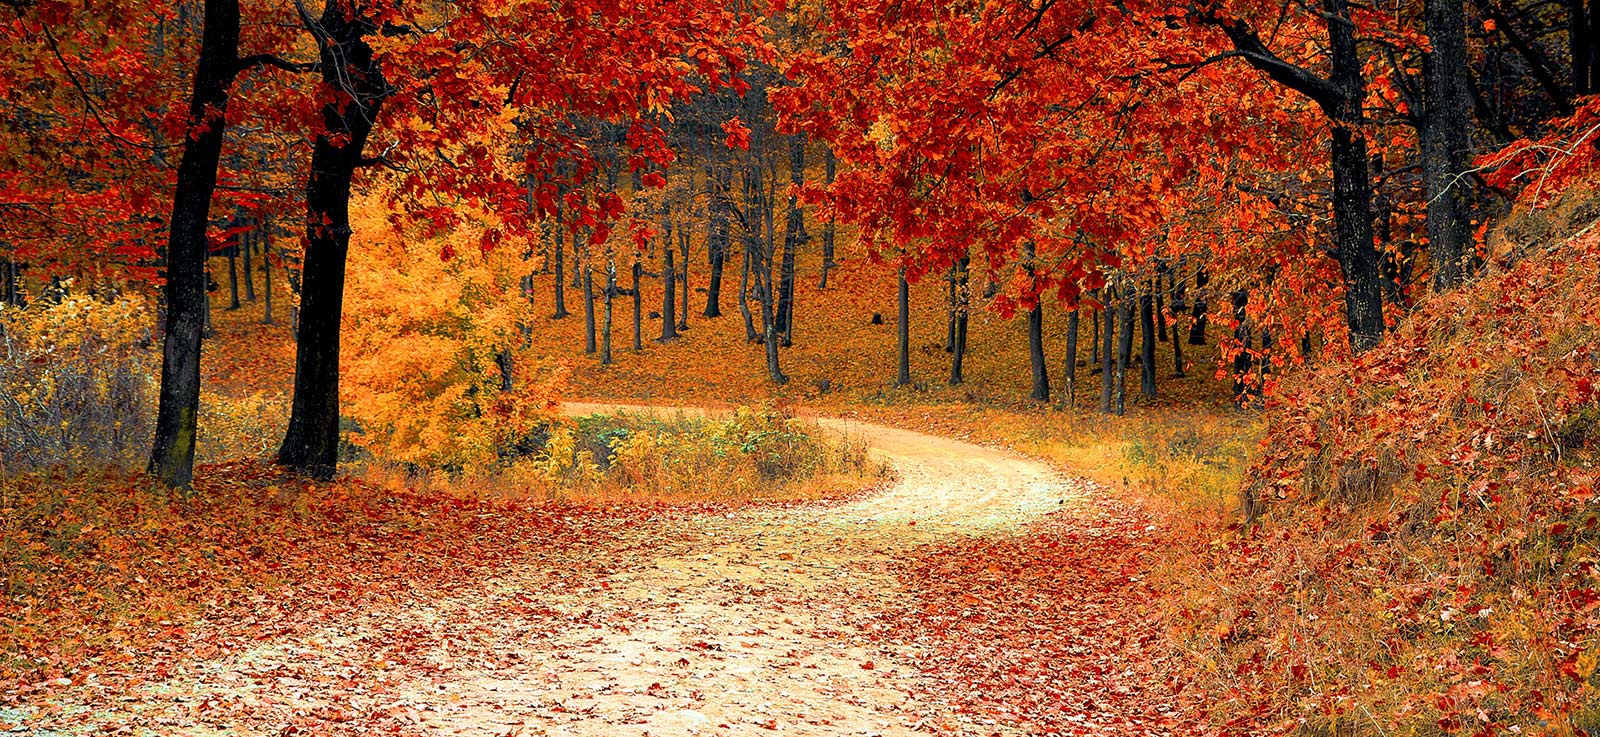 Dirt road in fall with multi colored leaves in Branson Missouri.